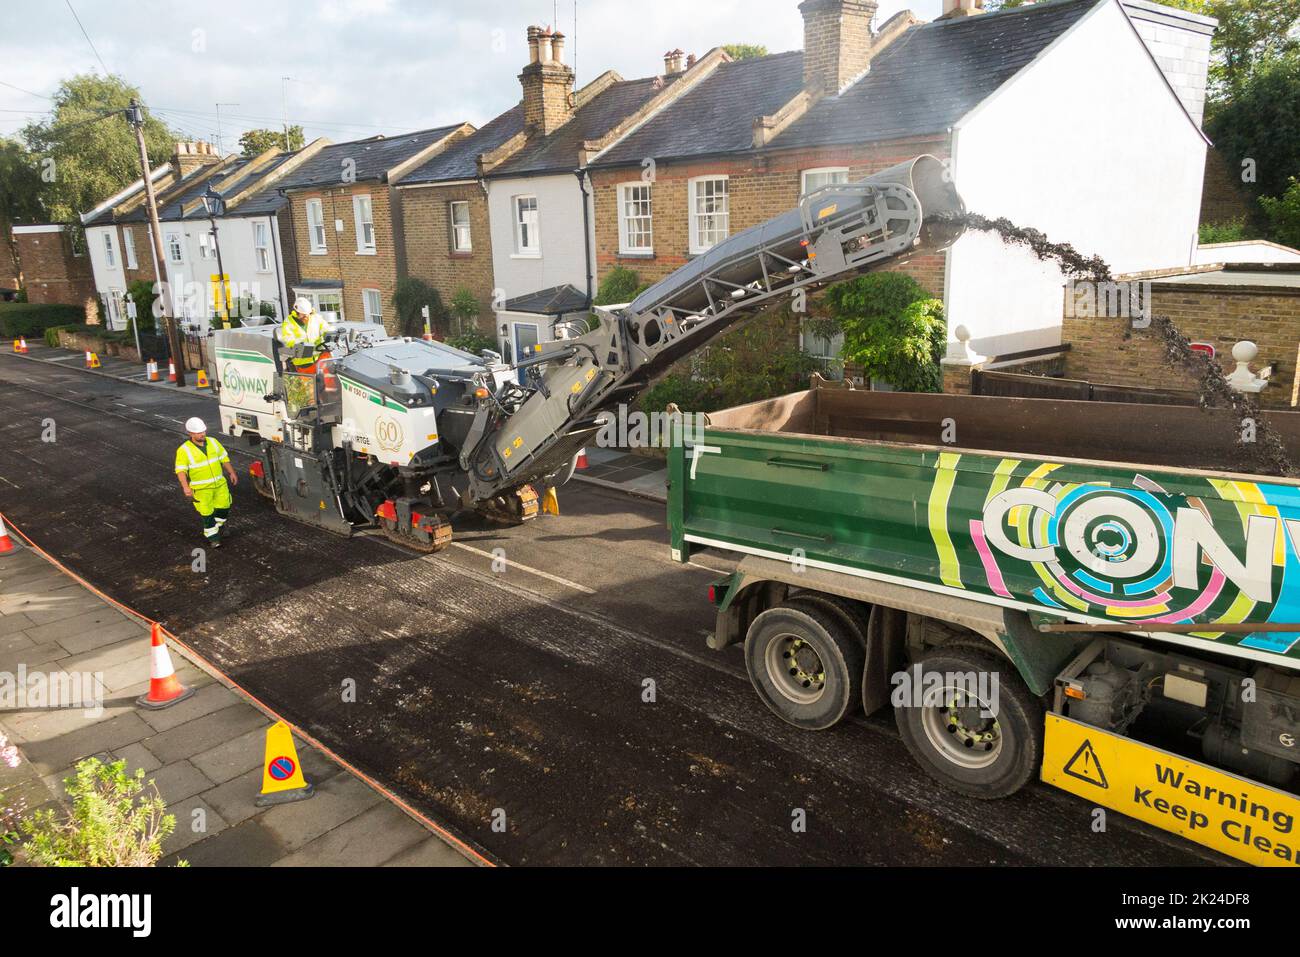 Mechanised removal of the old road surface prior to resurfacing of a residential Street in Twickenham, Greater London, UK. It will be resurfaced with tarmac after the previous worn and potholed asphalt has been removed. (132) Stock Photo